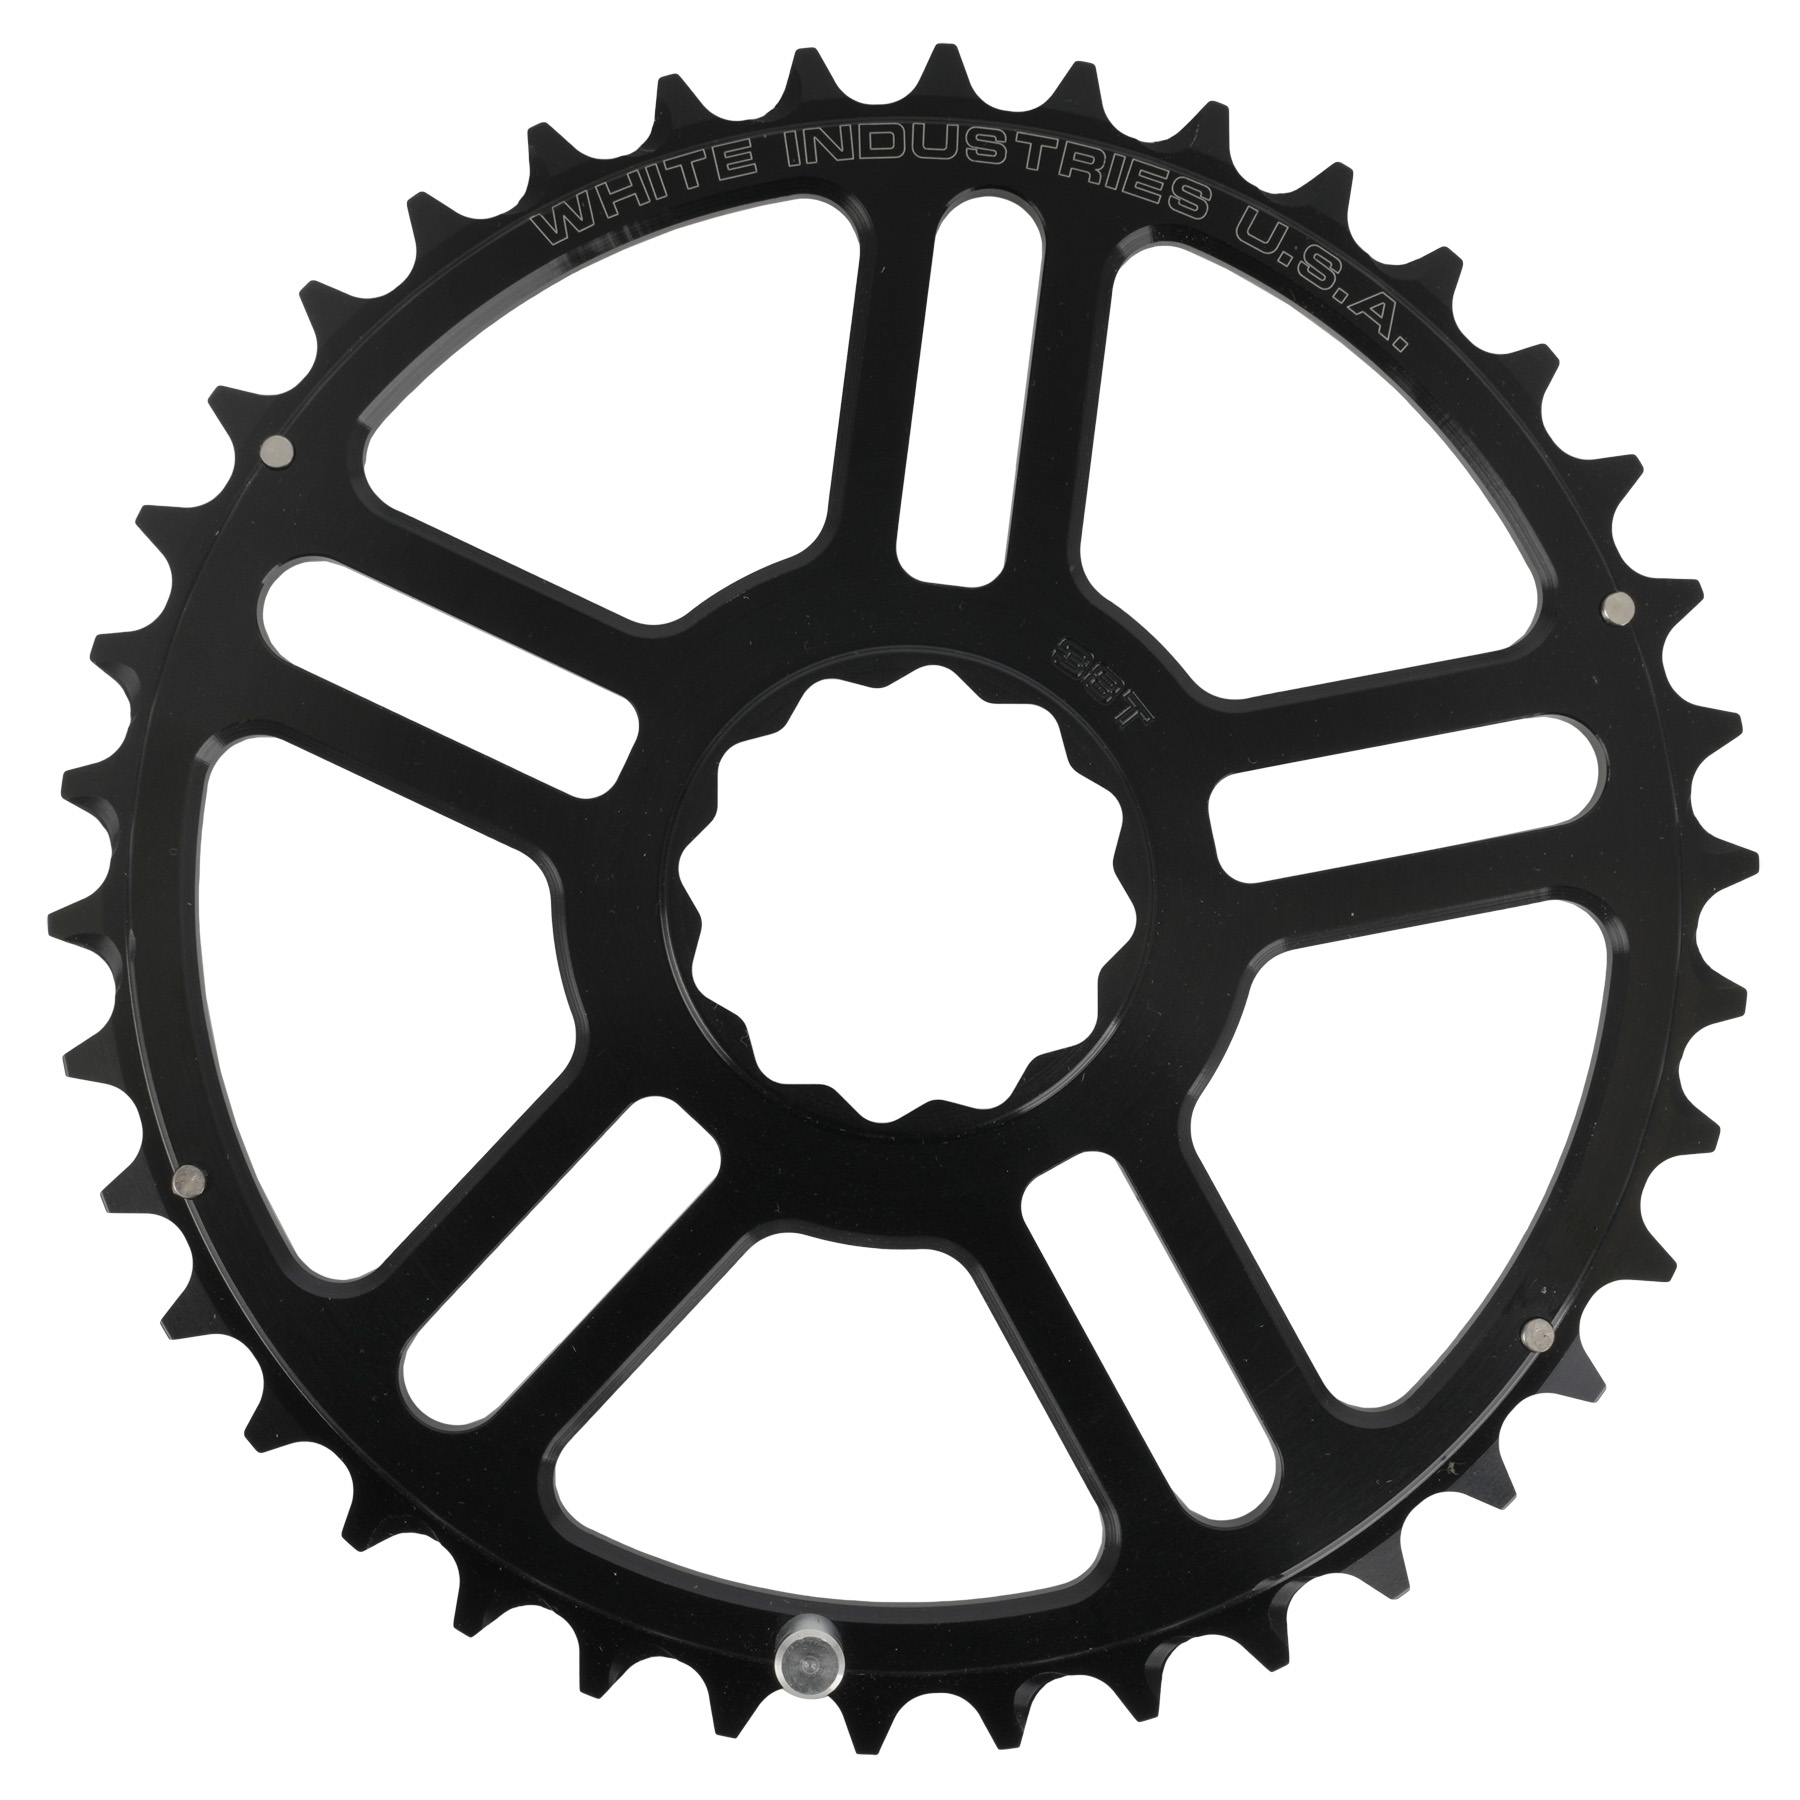 Productfoto van White Industries VBC outer Chainring for M30, G30, R30 Crank - black